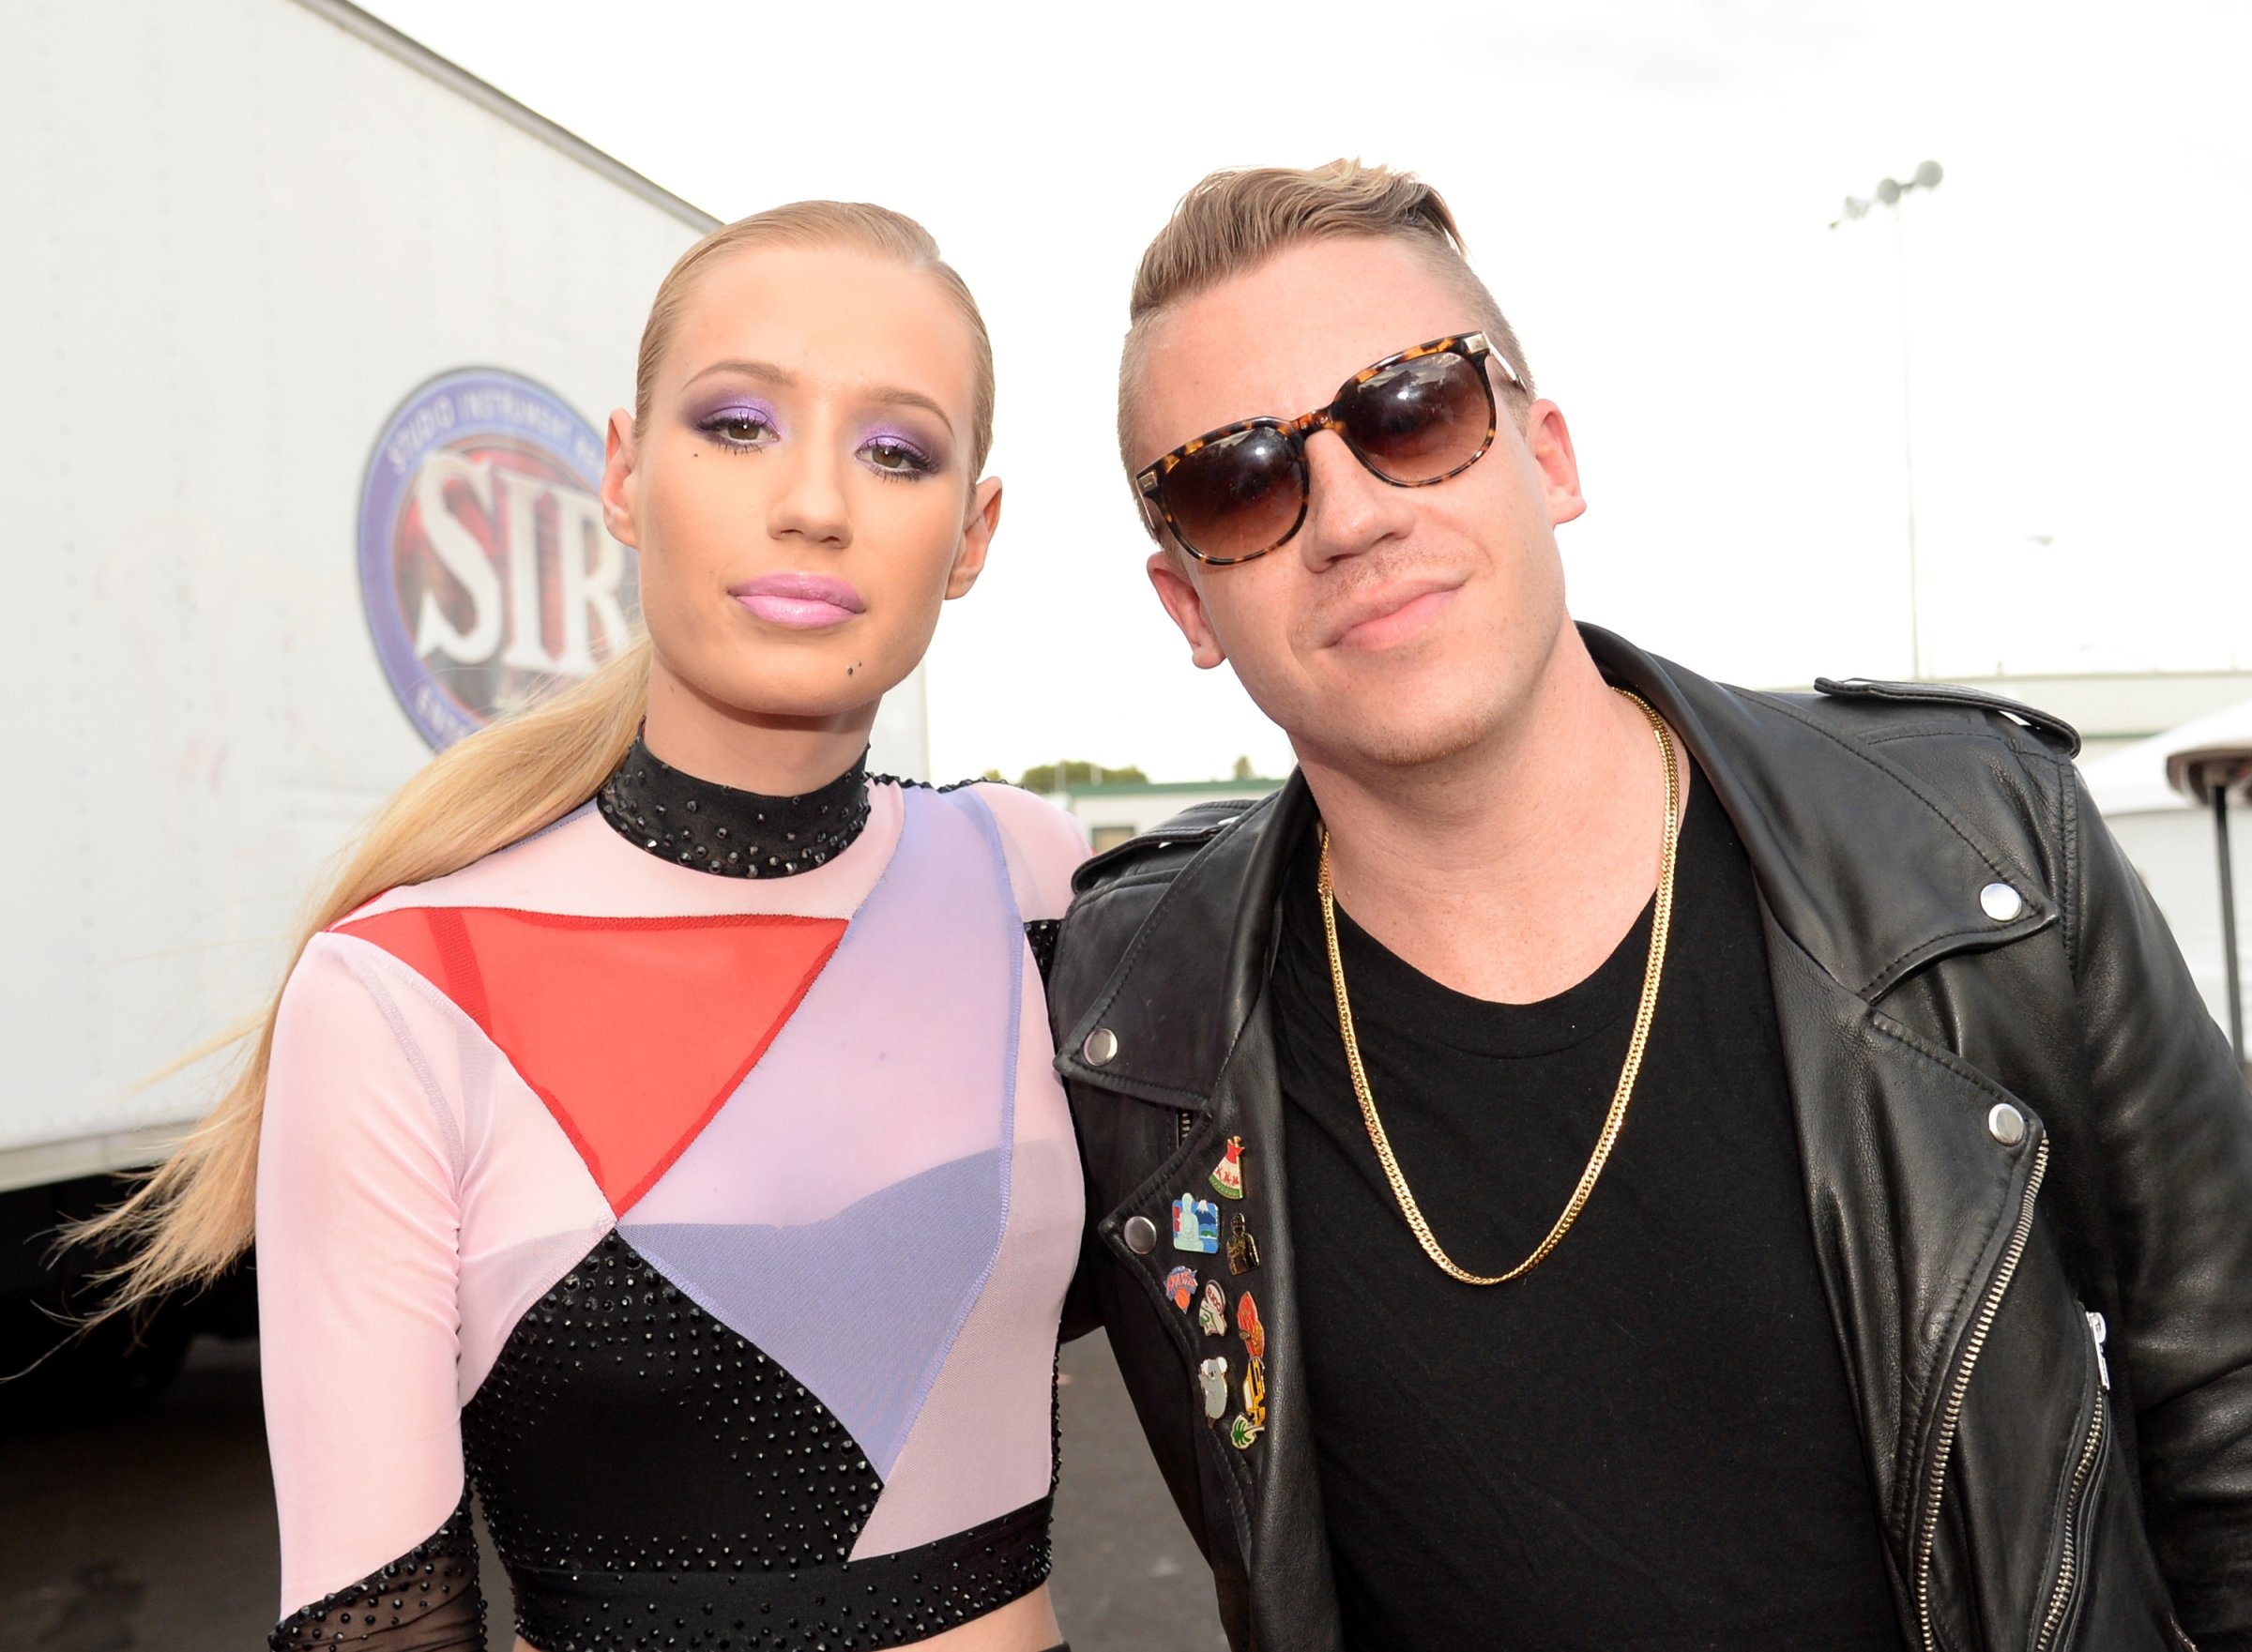 Rappers Iggy Azalea (L) and Macklemore attend the 2014 iHeartRadio Music Festival Village on September 20, 2014 in Las Vegas, Nevada.